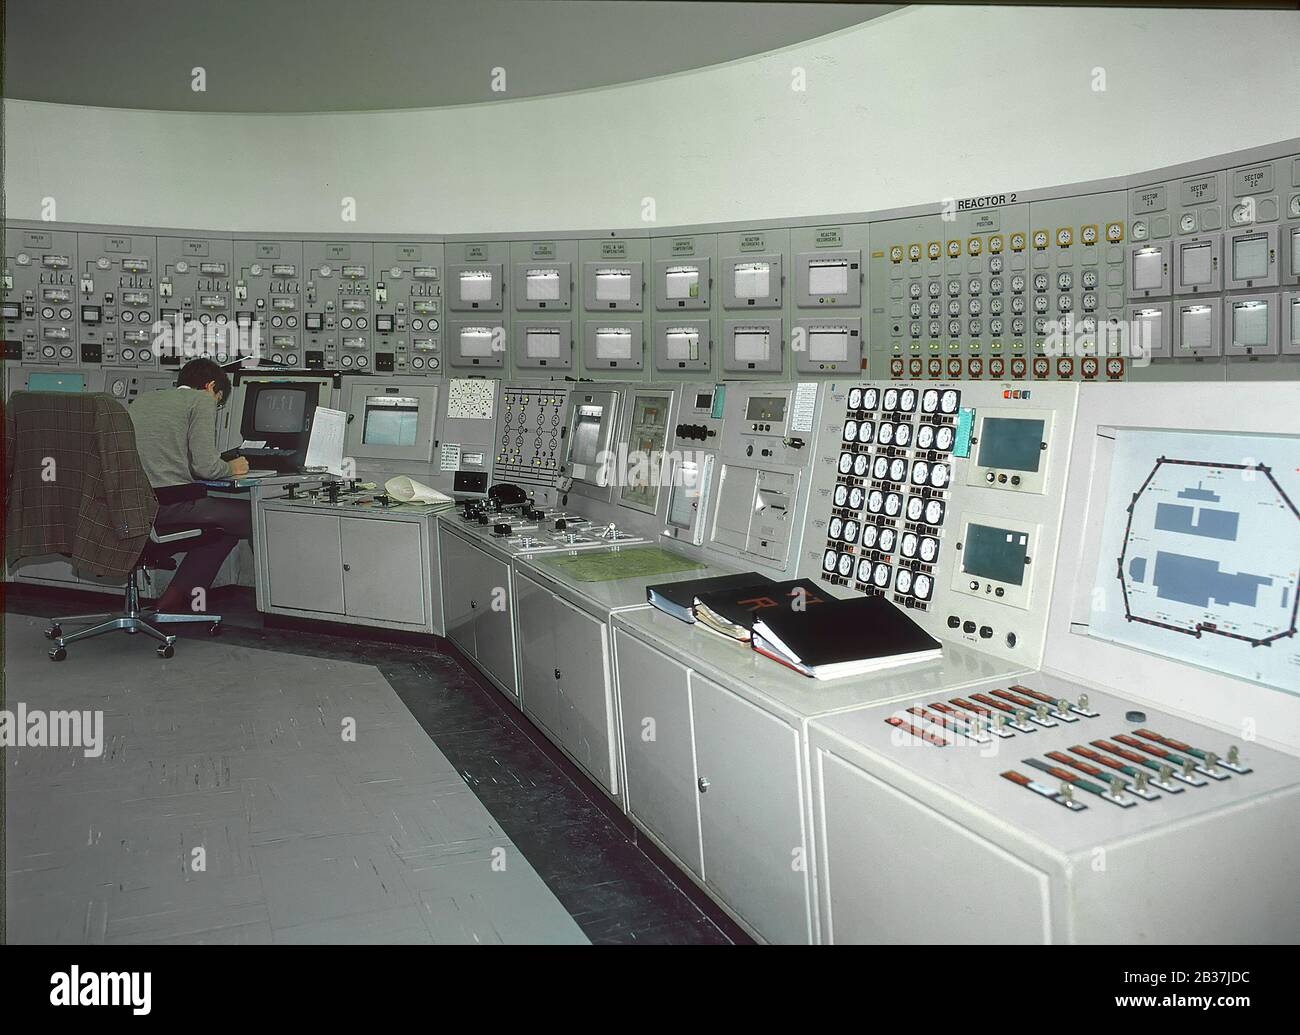 Archive 1980s image interior view man working inside control room of a Magnox nuclear electricity power station at Bradwell on Sea Essex England UK Stock Photo